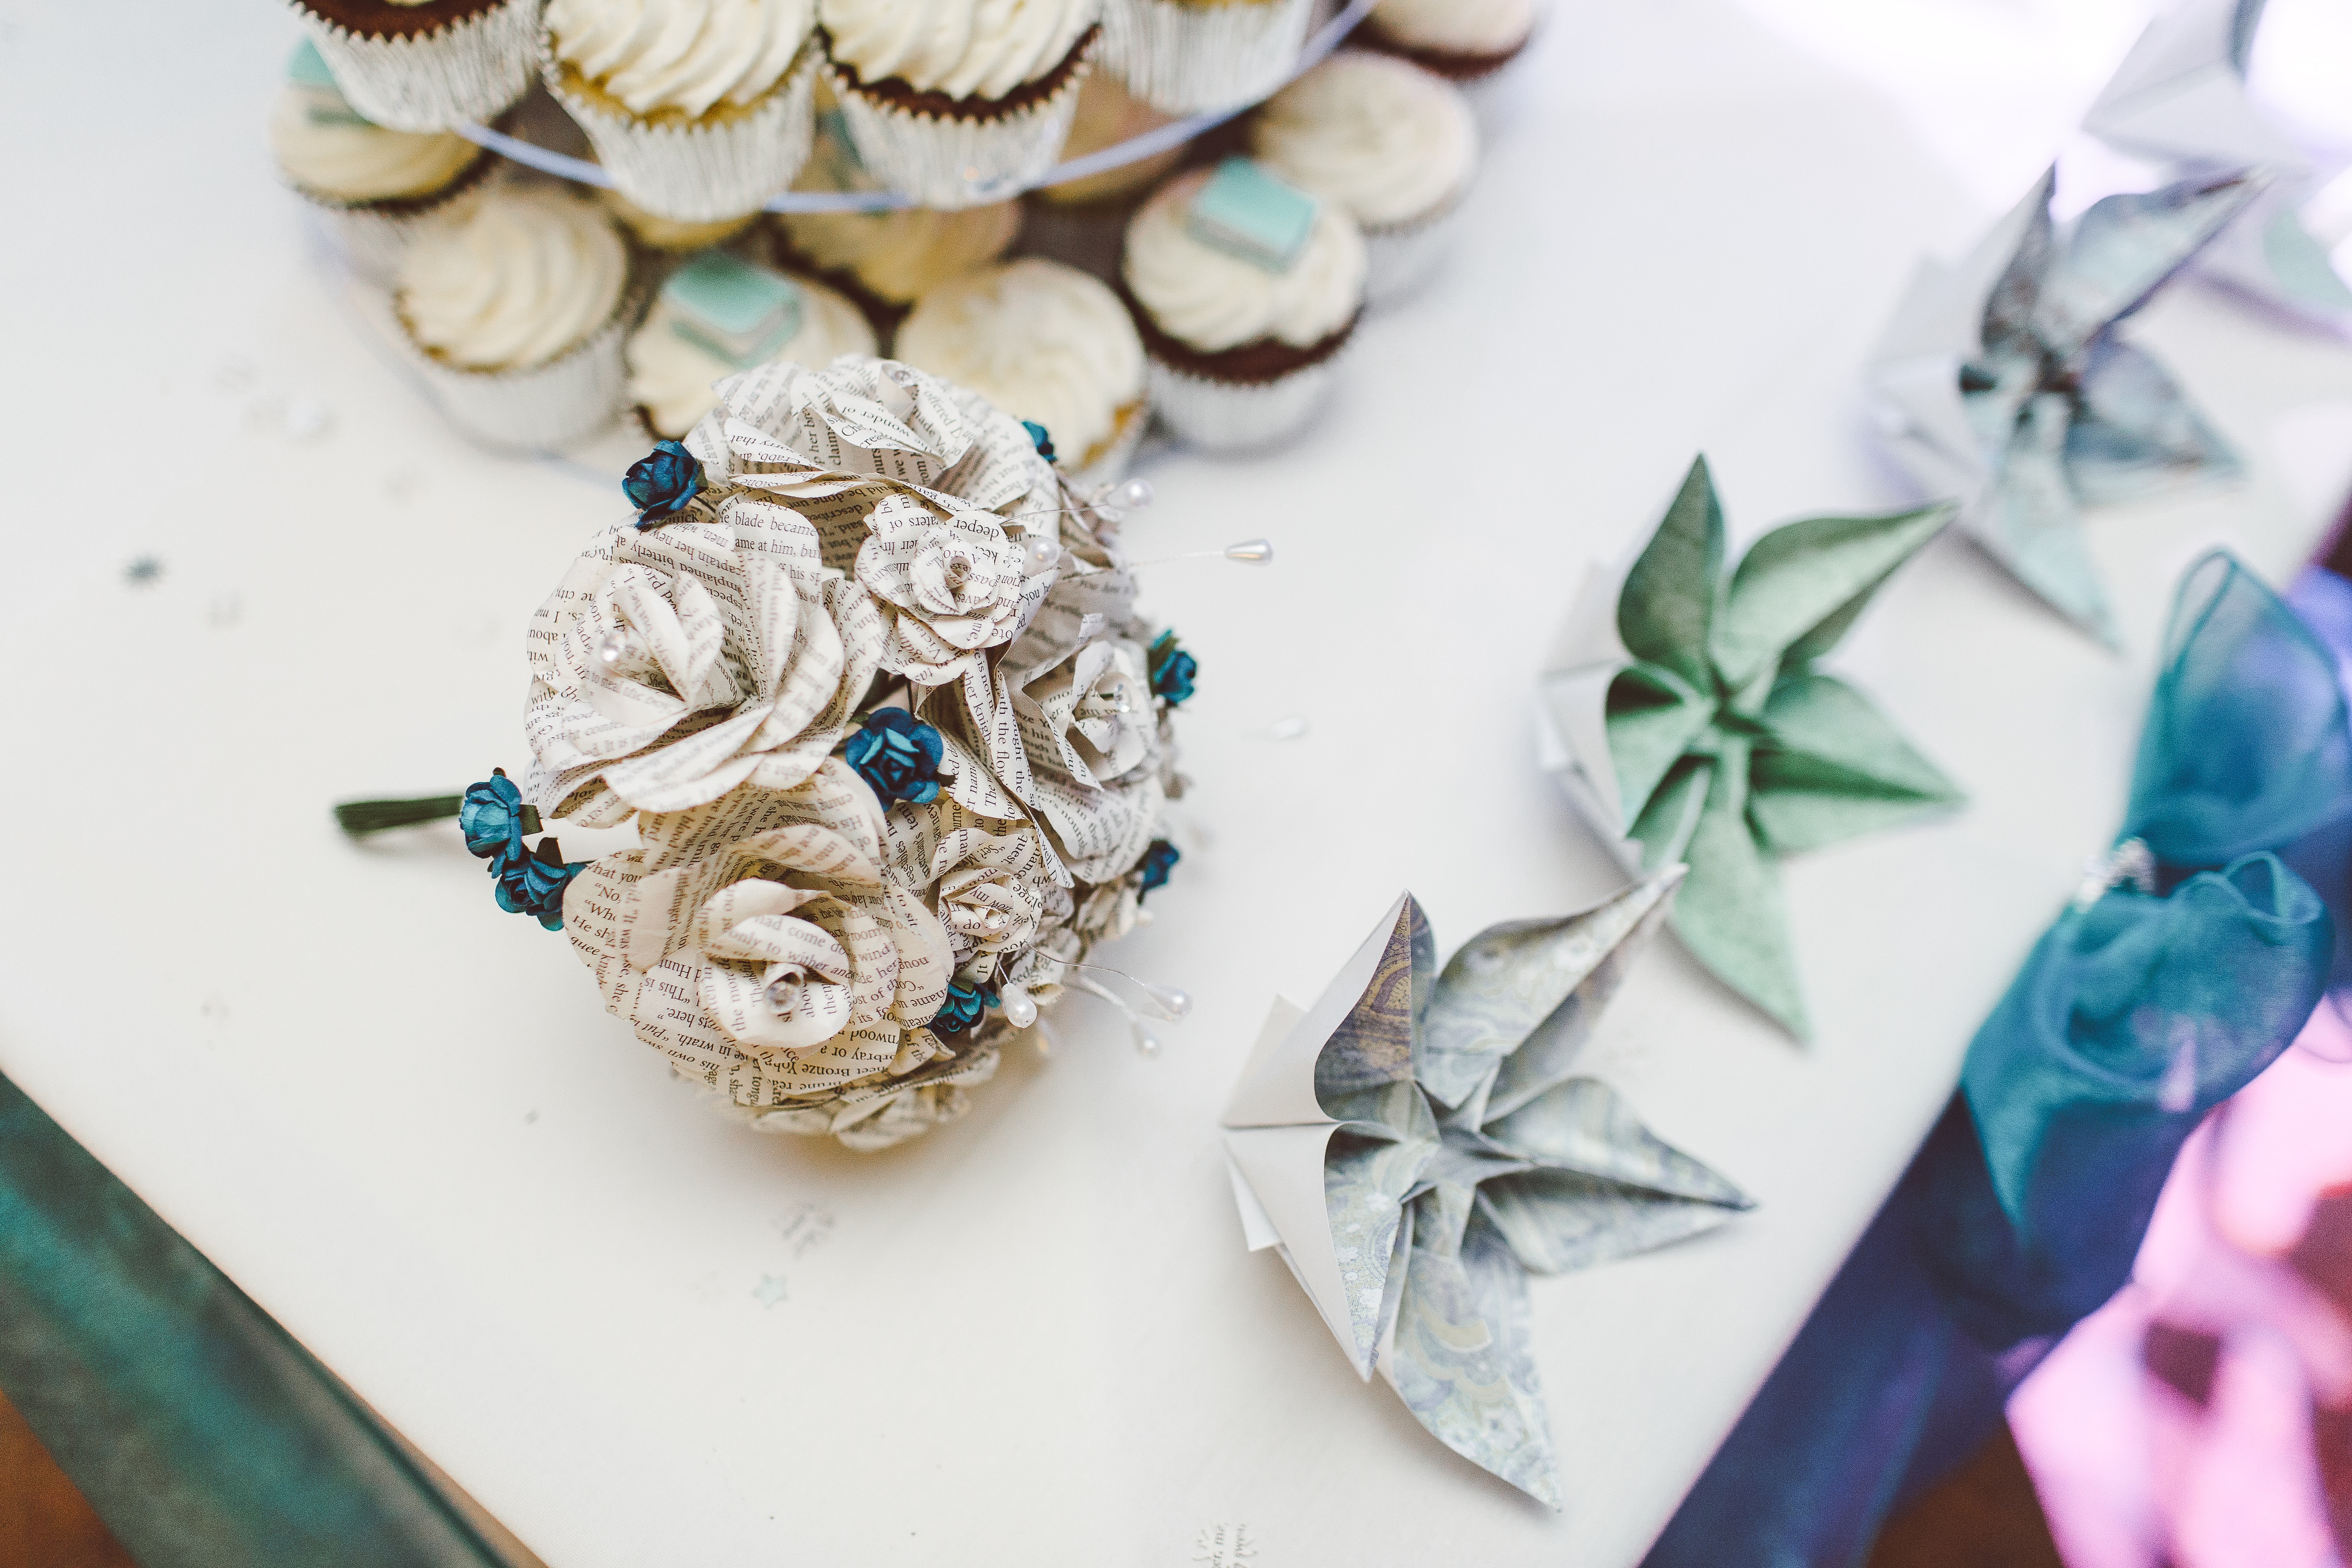 Book paper flowers: photo by Wedding Photography on Unsplash